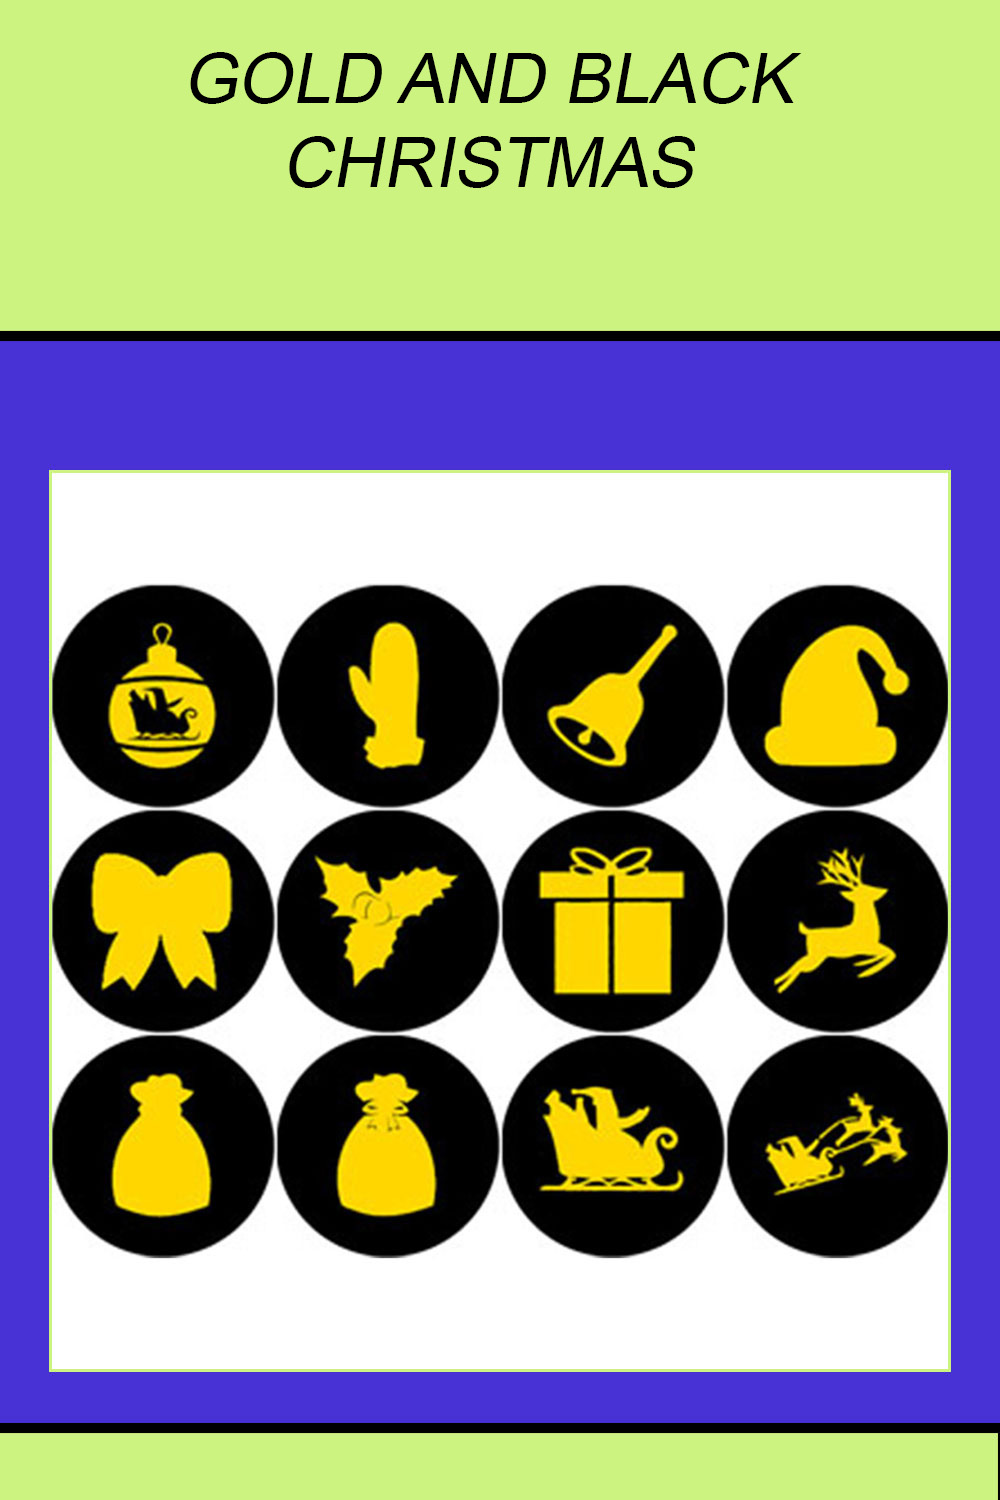 GOLD AND BLACK CHRISTMAS ICONS pinterest preview image.